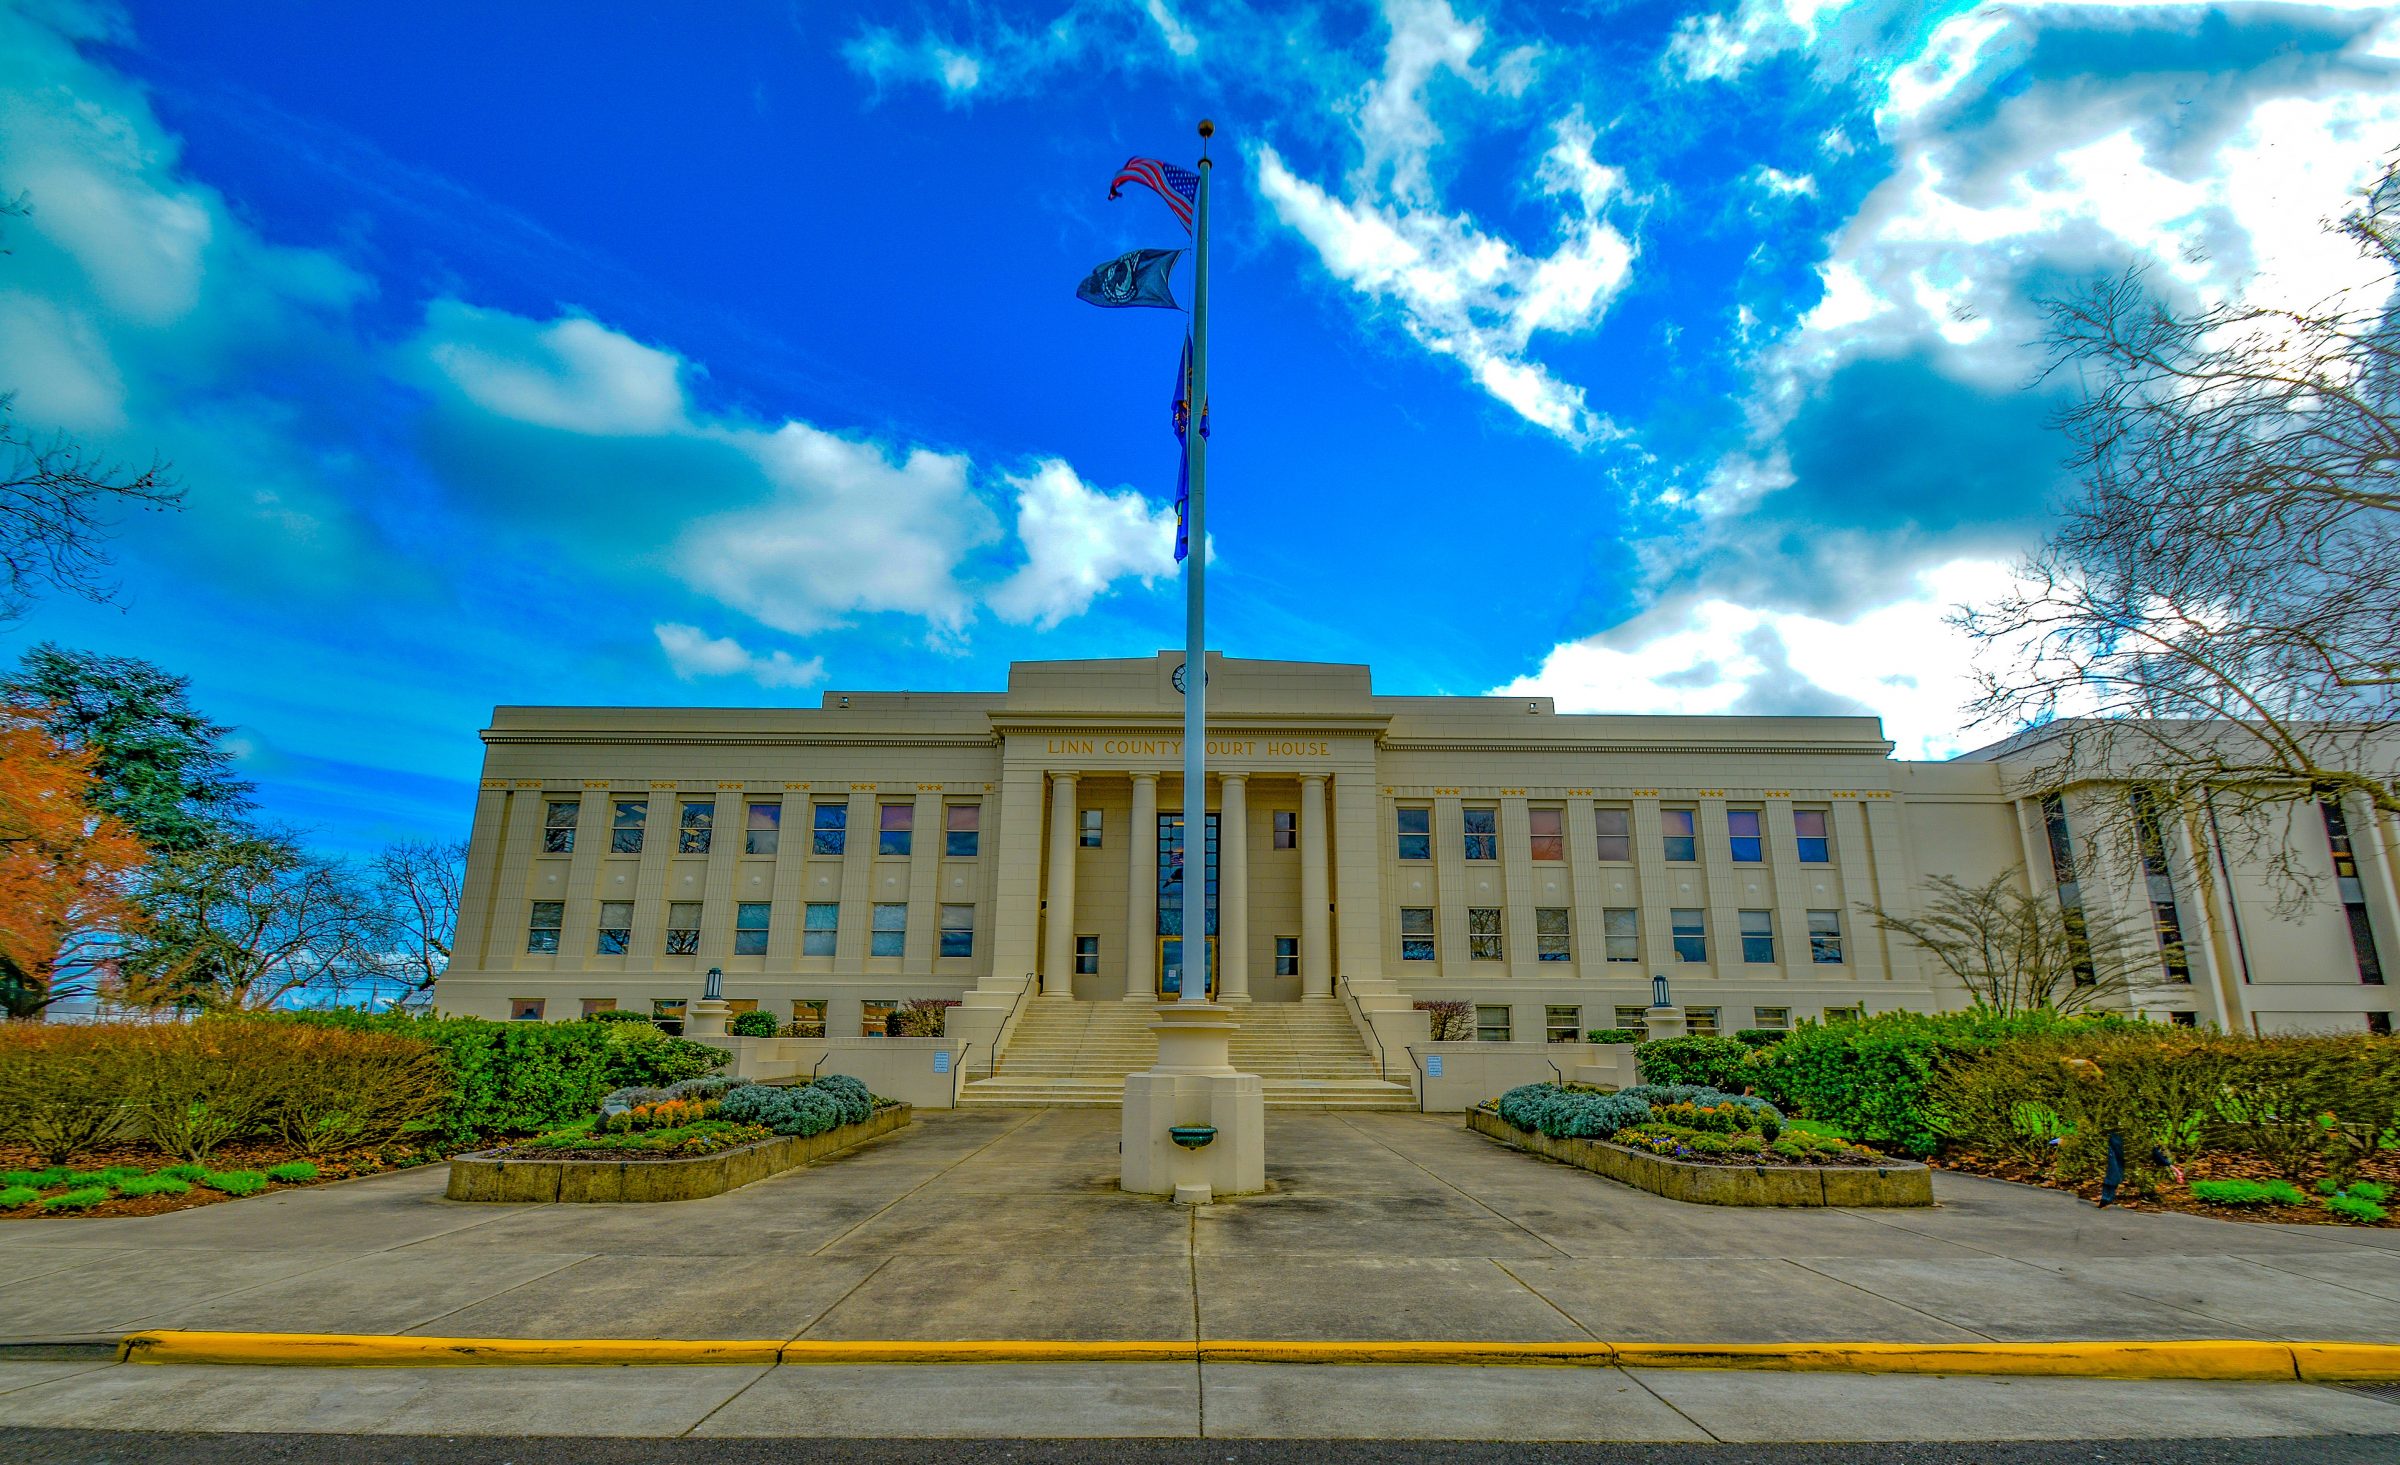 "Linn County Courthouse" by Dave Maestas